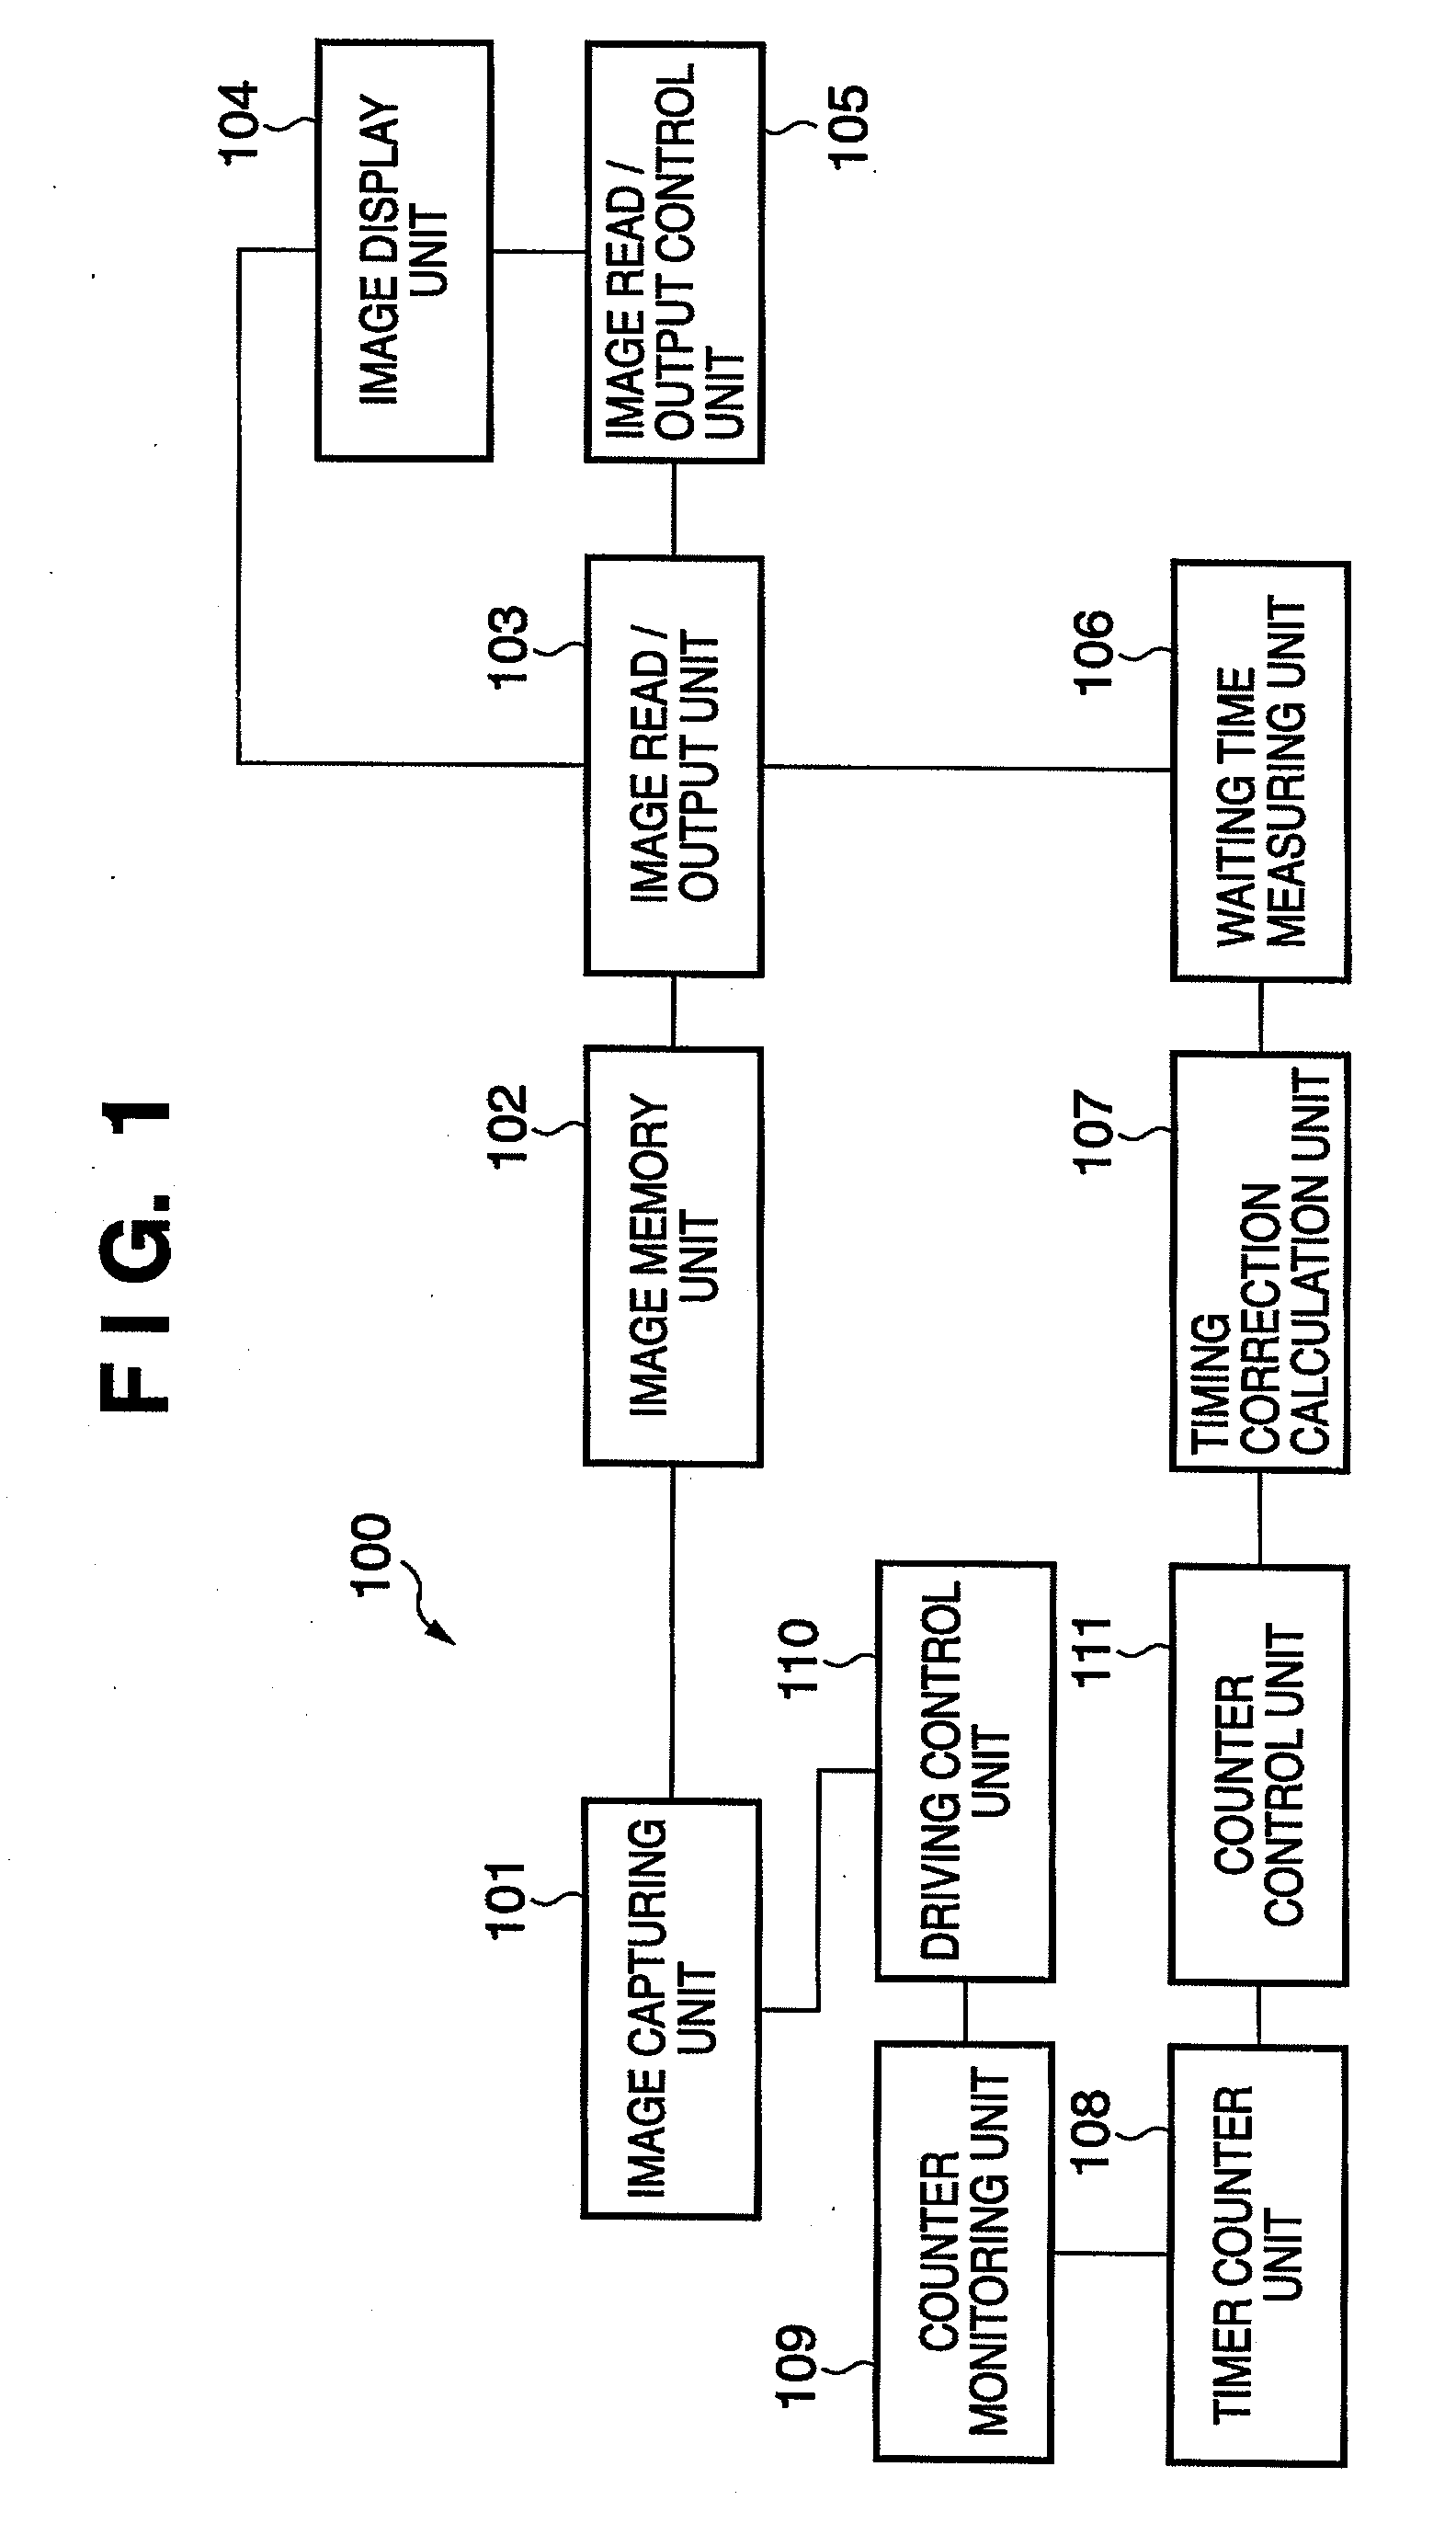 Image capture and display control apparatus, image capture and display control method, and image capture and display system